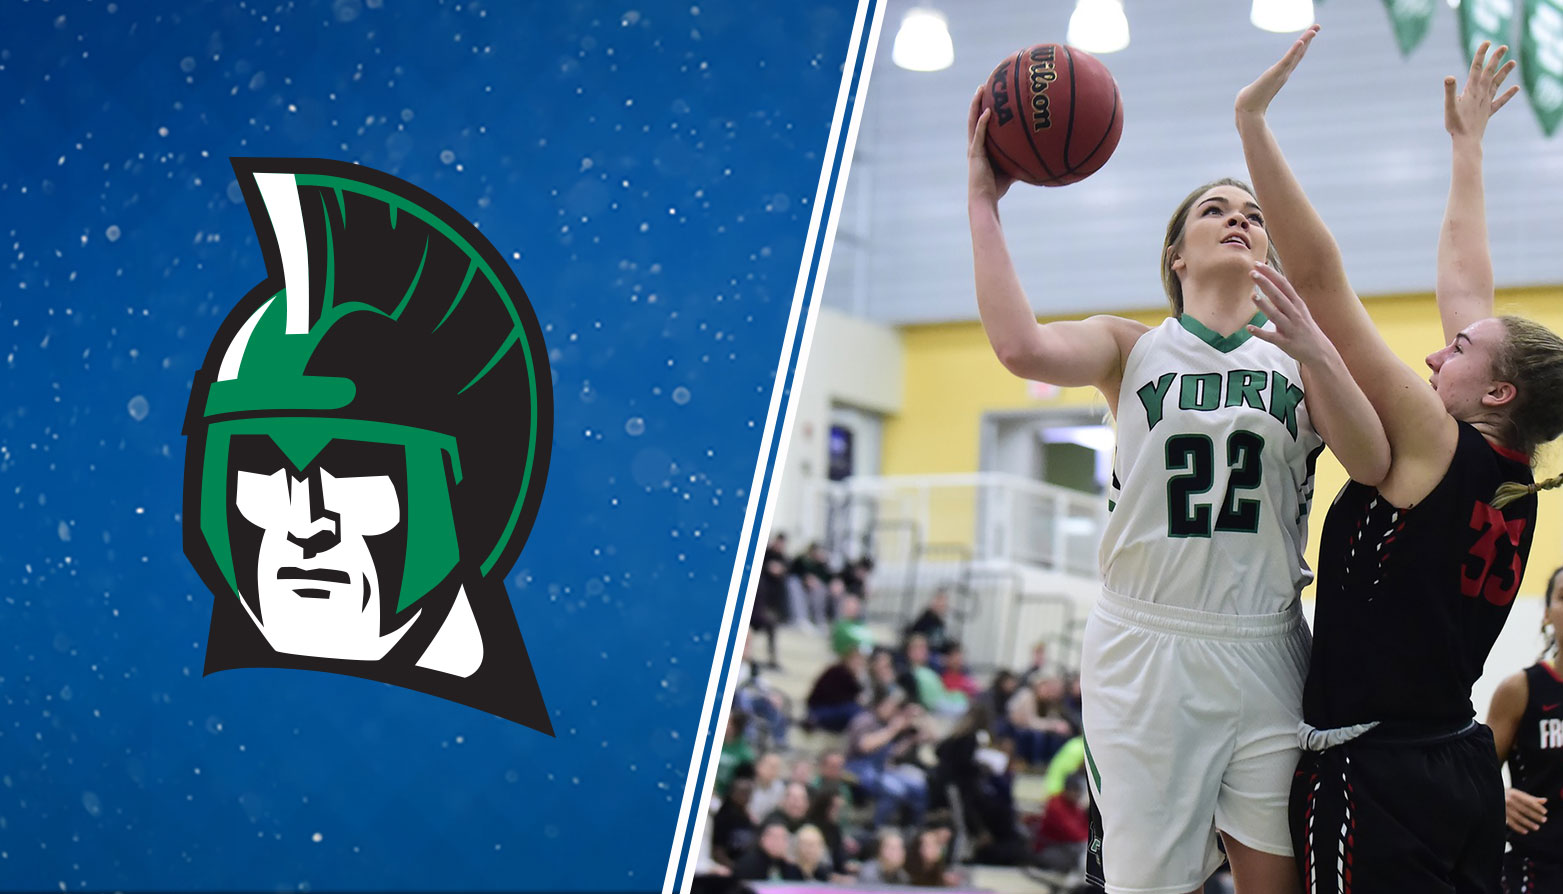 York's Katie McGowan Selected CAC Women's Basketball Player of the Week